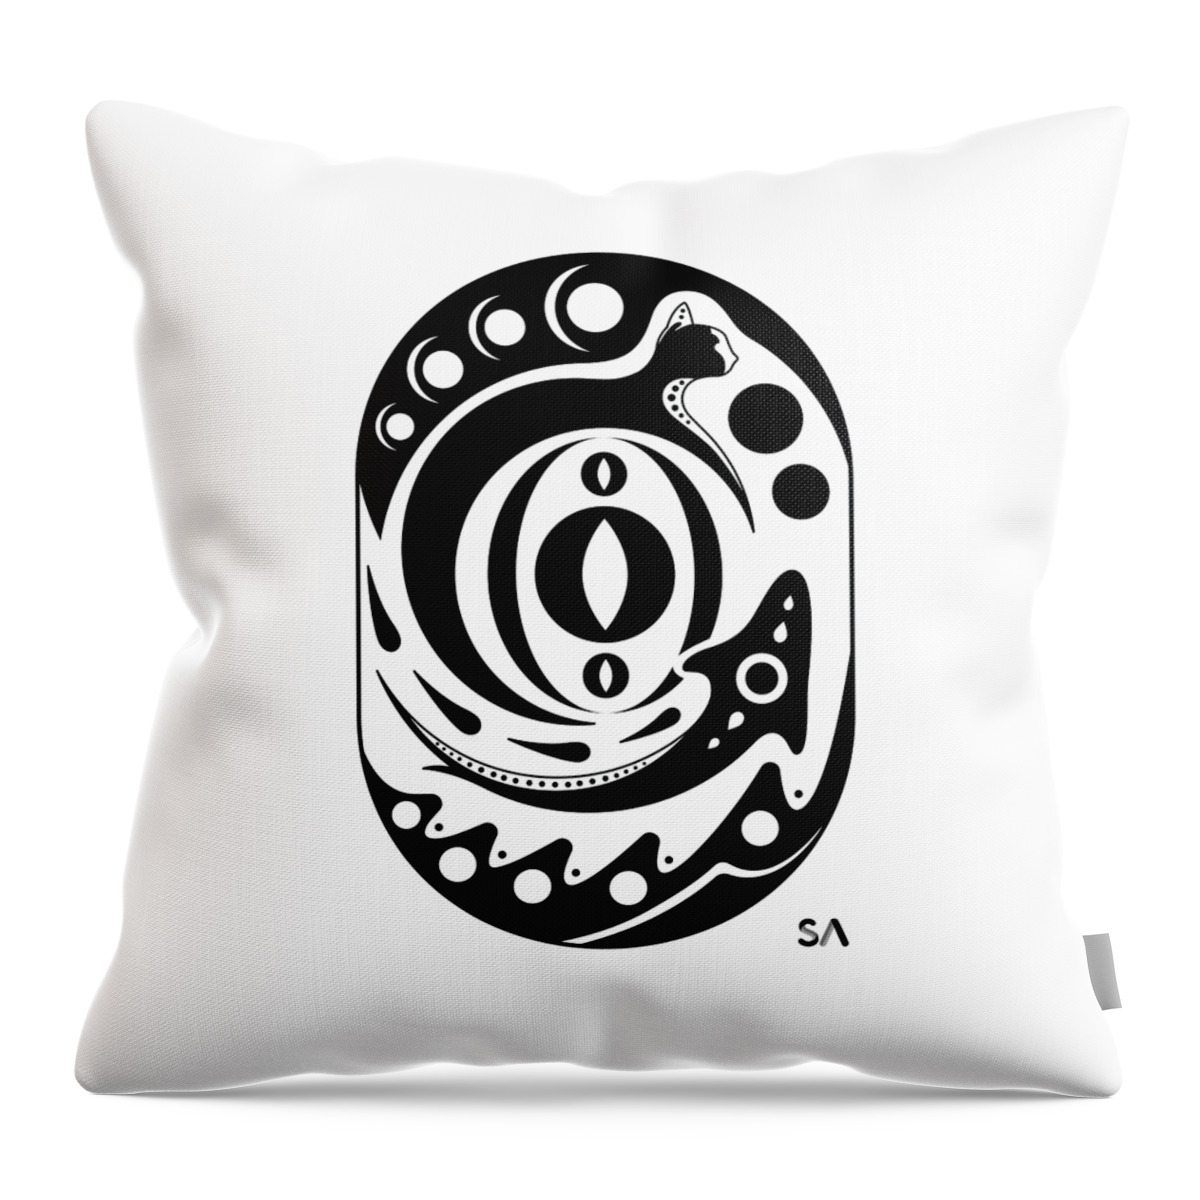 Black And White Throw Pillow featuring the digital art Fish Cat by Silvio Ary Cavalcante